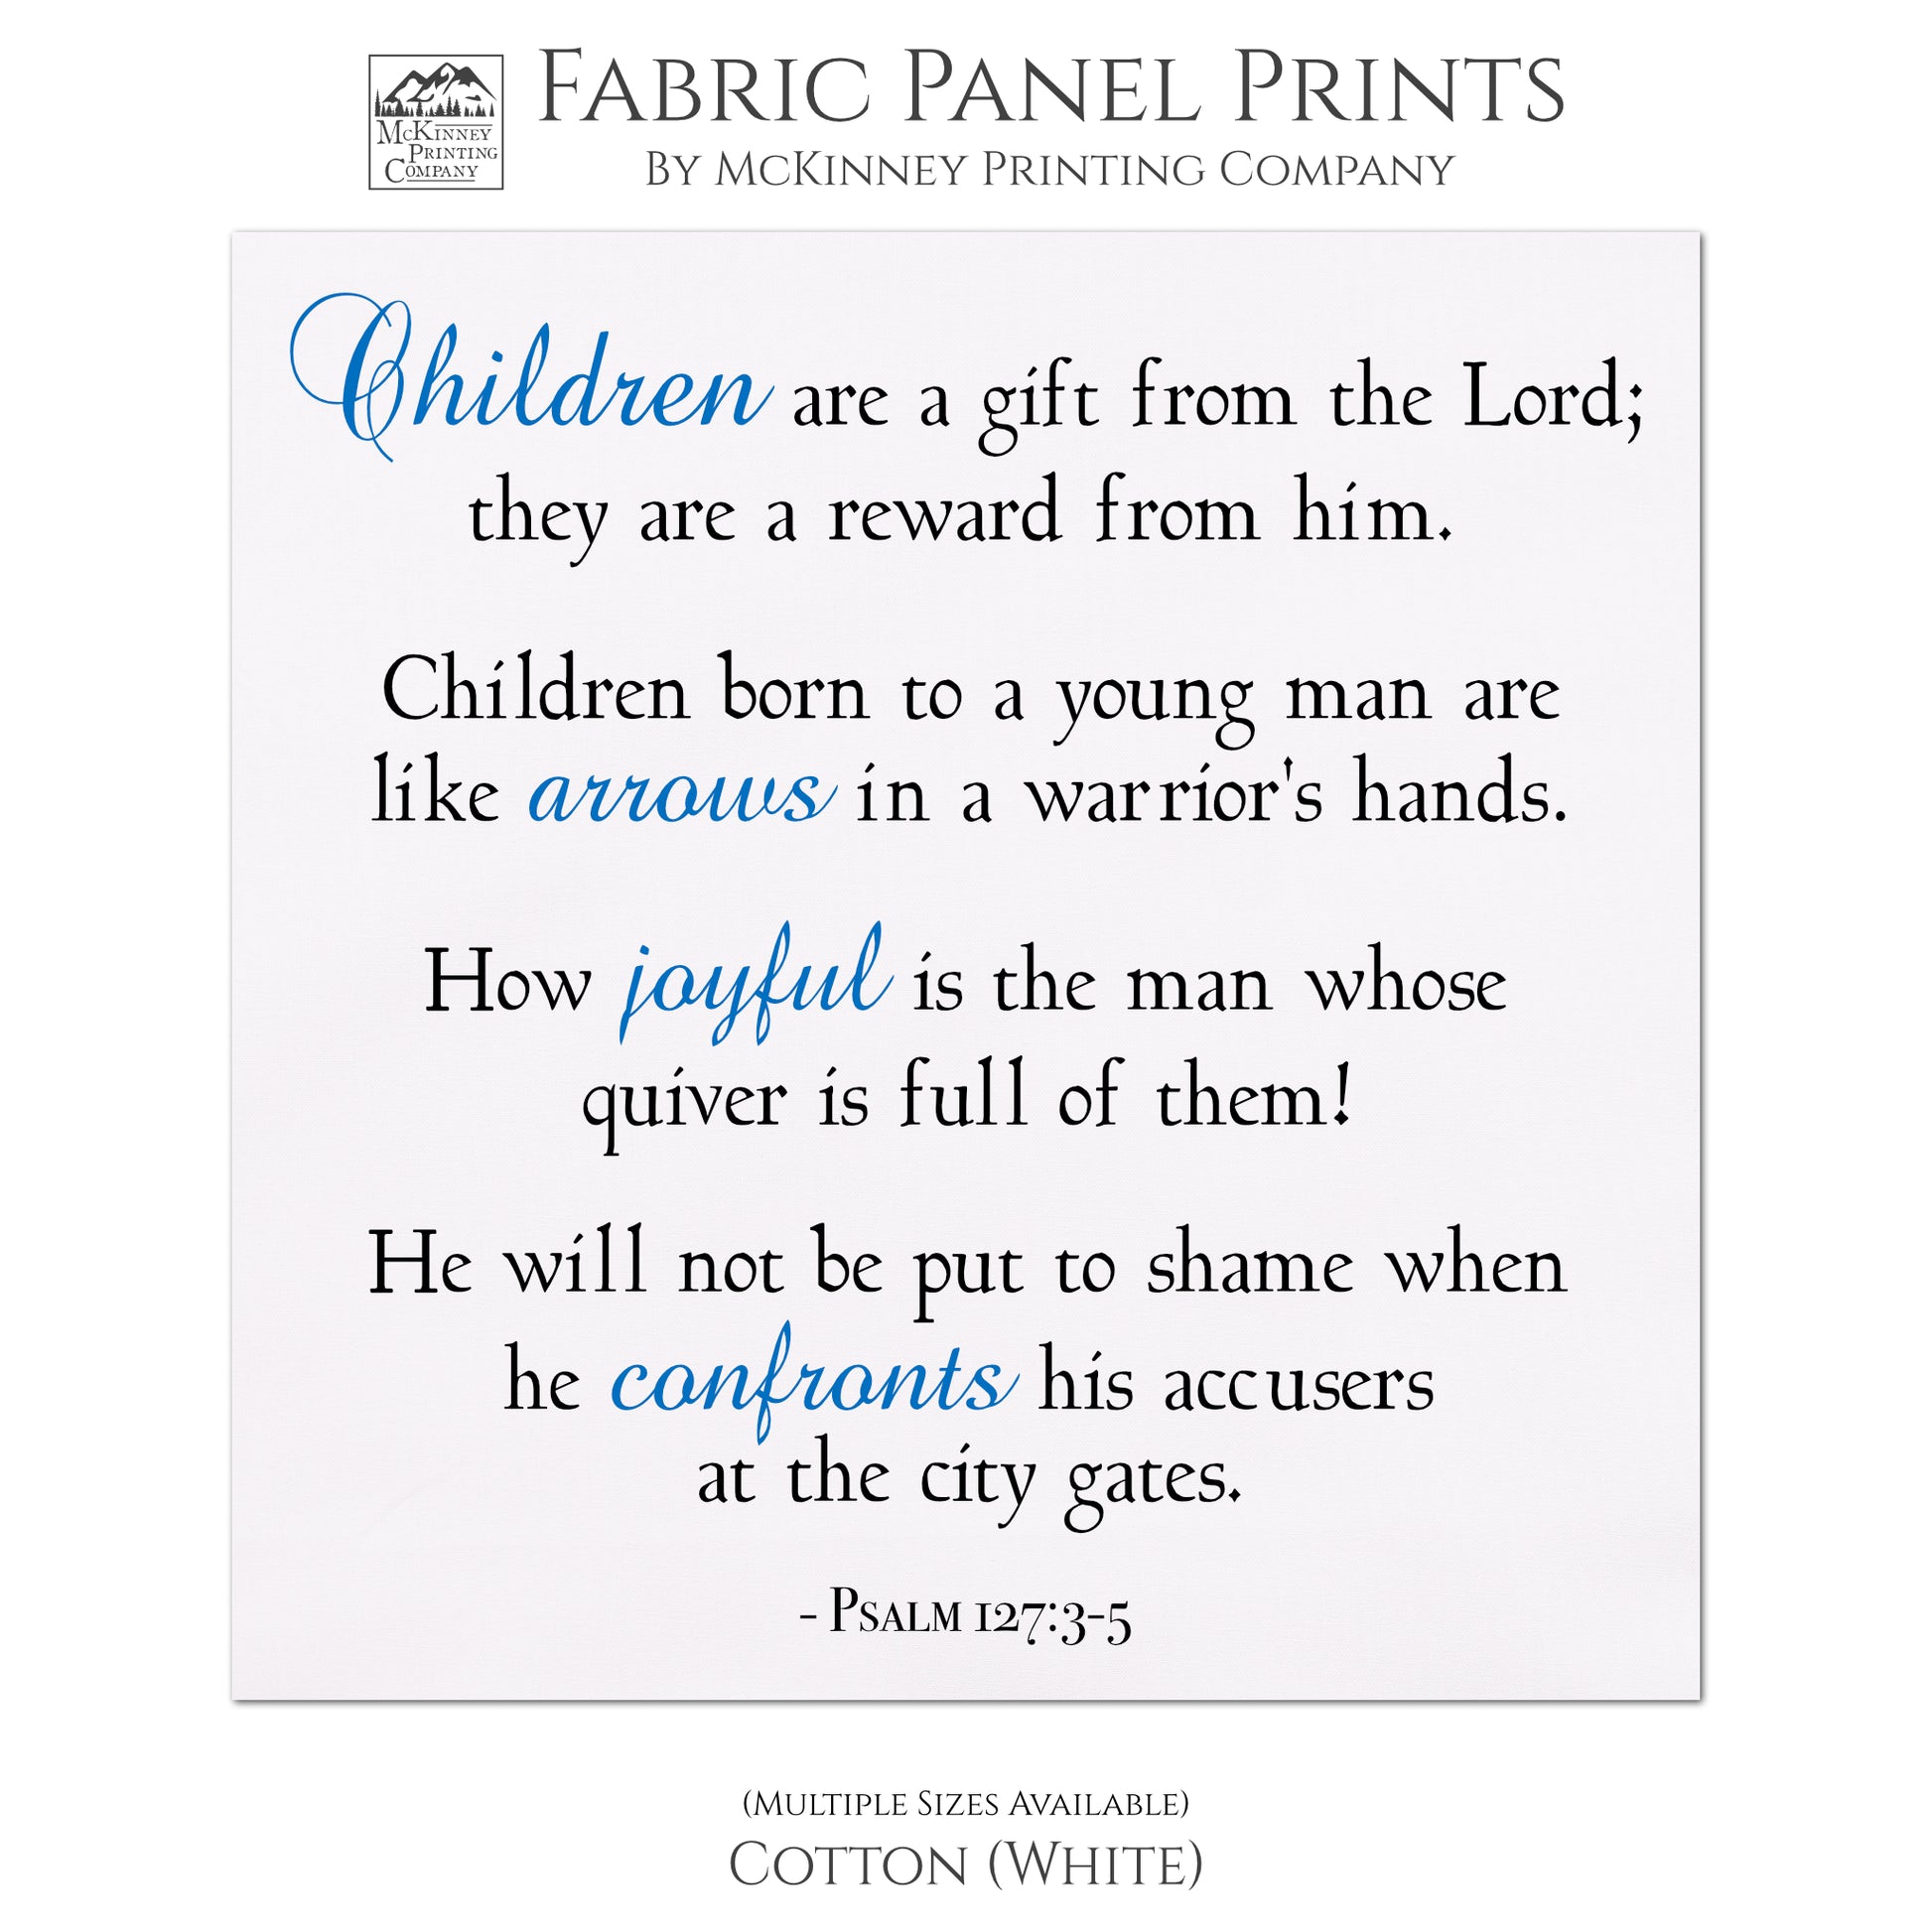 Children are a gift from the Lord; they are a reward from him. Children born to a young man are like arrows in a warrior's hands. How joyful is the man whose quiver is full of them! He will not be put to shame when he confronts his accusers at the city gates - Psalm 127:3-5, Religious Fabric, Scripture, Quilt Block Fabric - Cotton, White